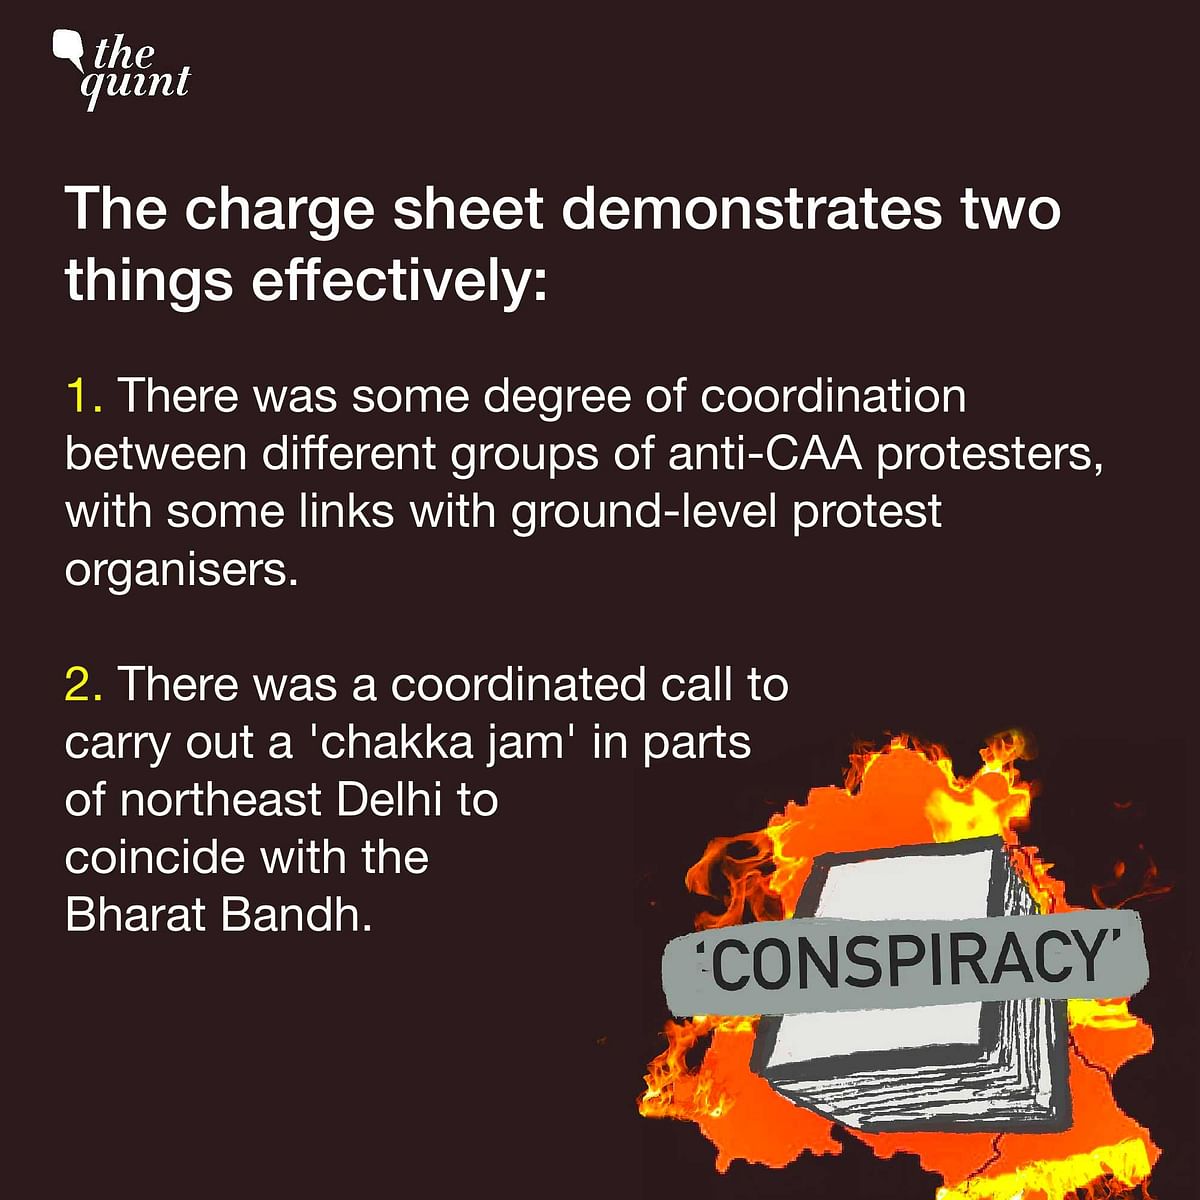 The 8 January meeting has mysteriously vanished and the link between Chakka Jam and communal violence isn’t clear.